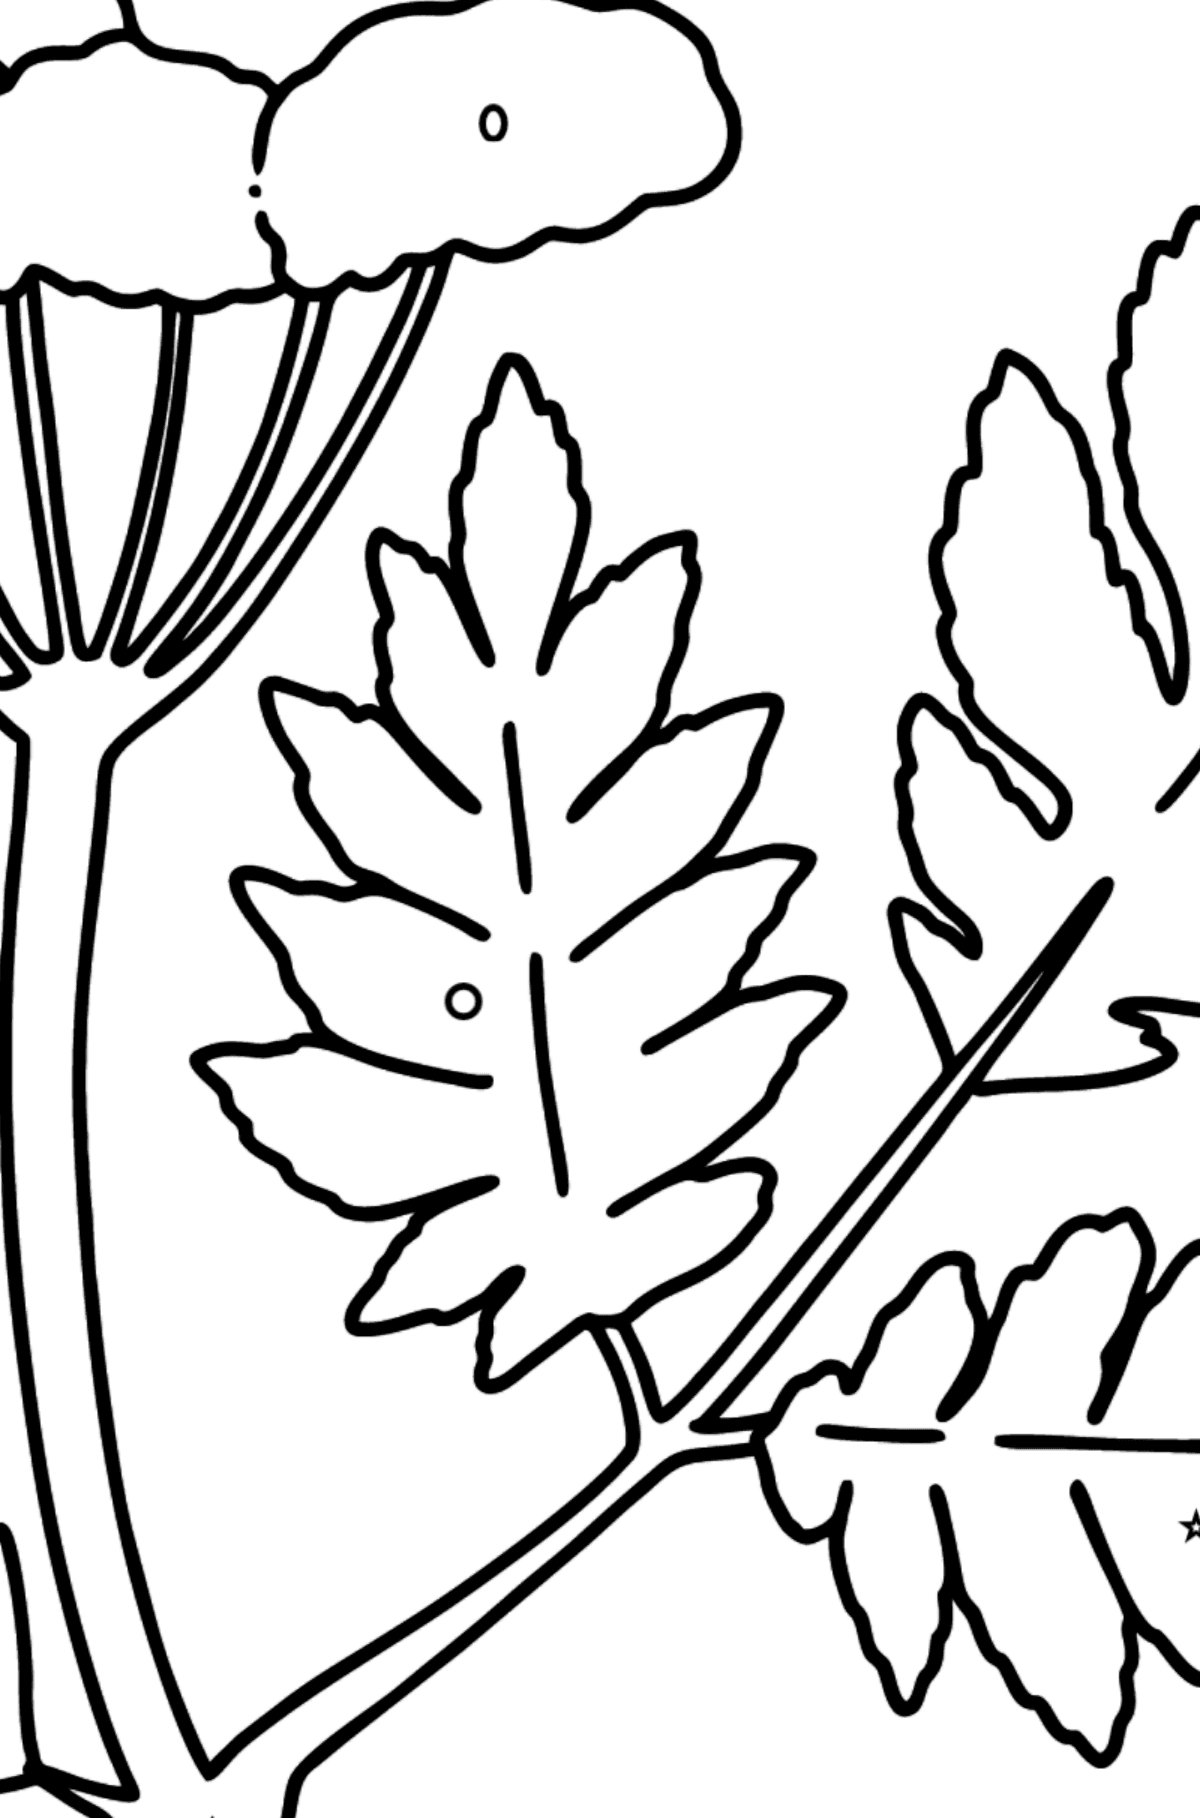 Hemlock coloring page - Coloring by Geometric Shapes for Kids